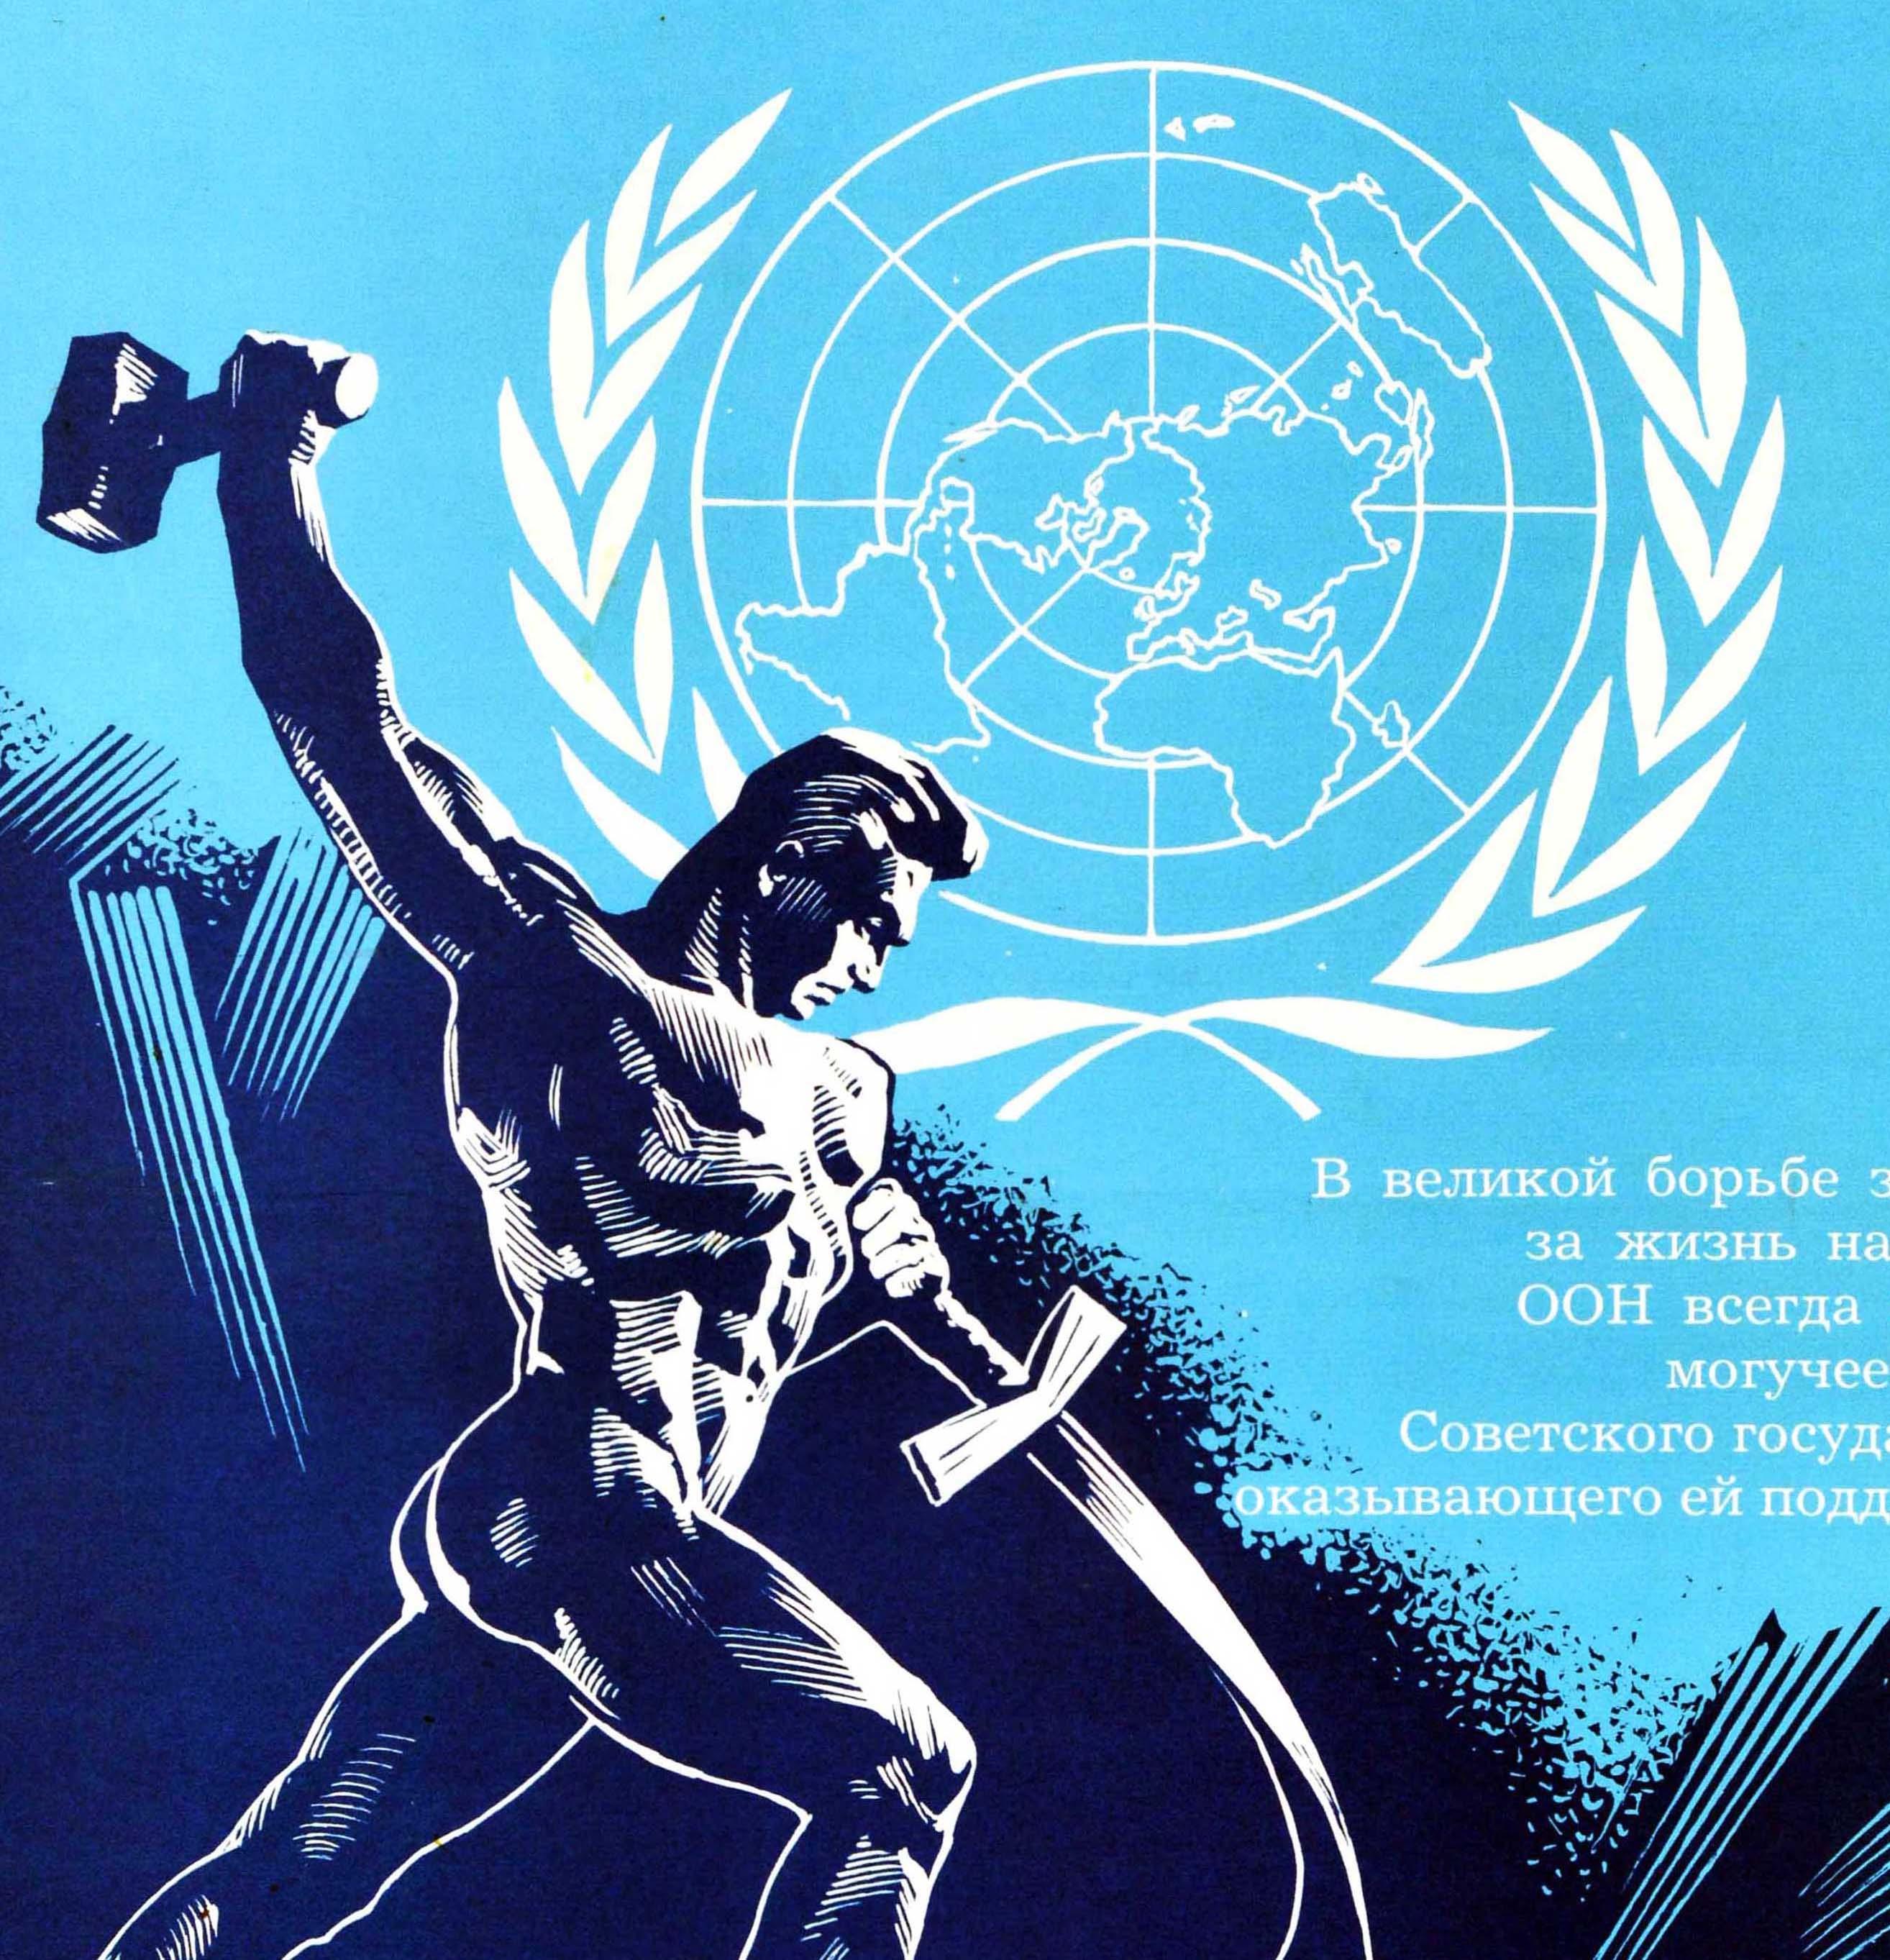 Original vintage Soviet poster for the 40 anniversary of the United Nations (established 1945) - Перекуем мечи на орала! Let's forge swords into ploughs - featuring a dynamic design of a man holding up a hammer and bending a sword in front of the